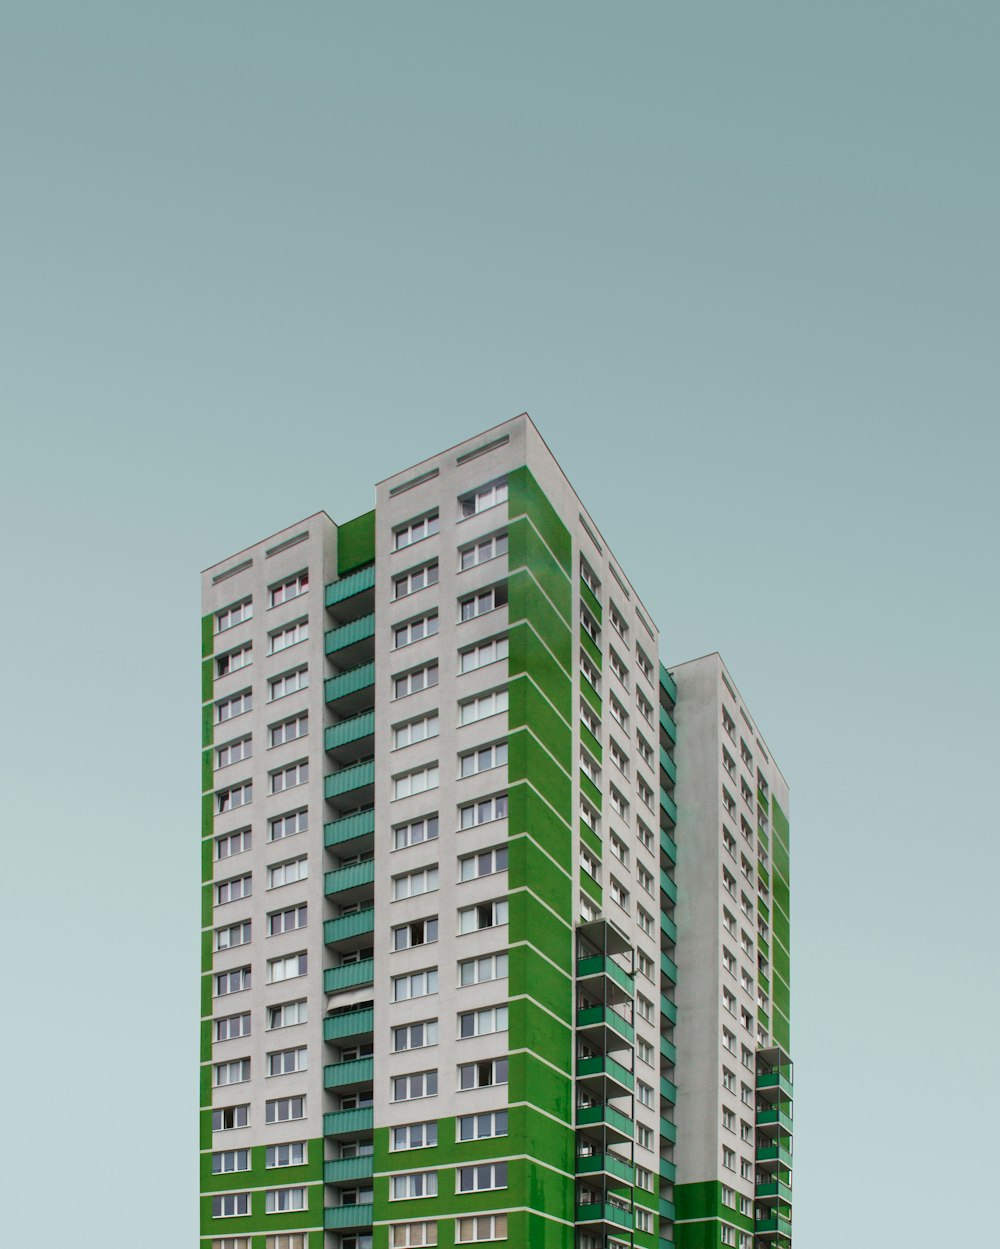 green and white concrete high-rise building at daytime